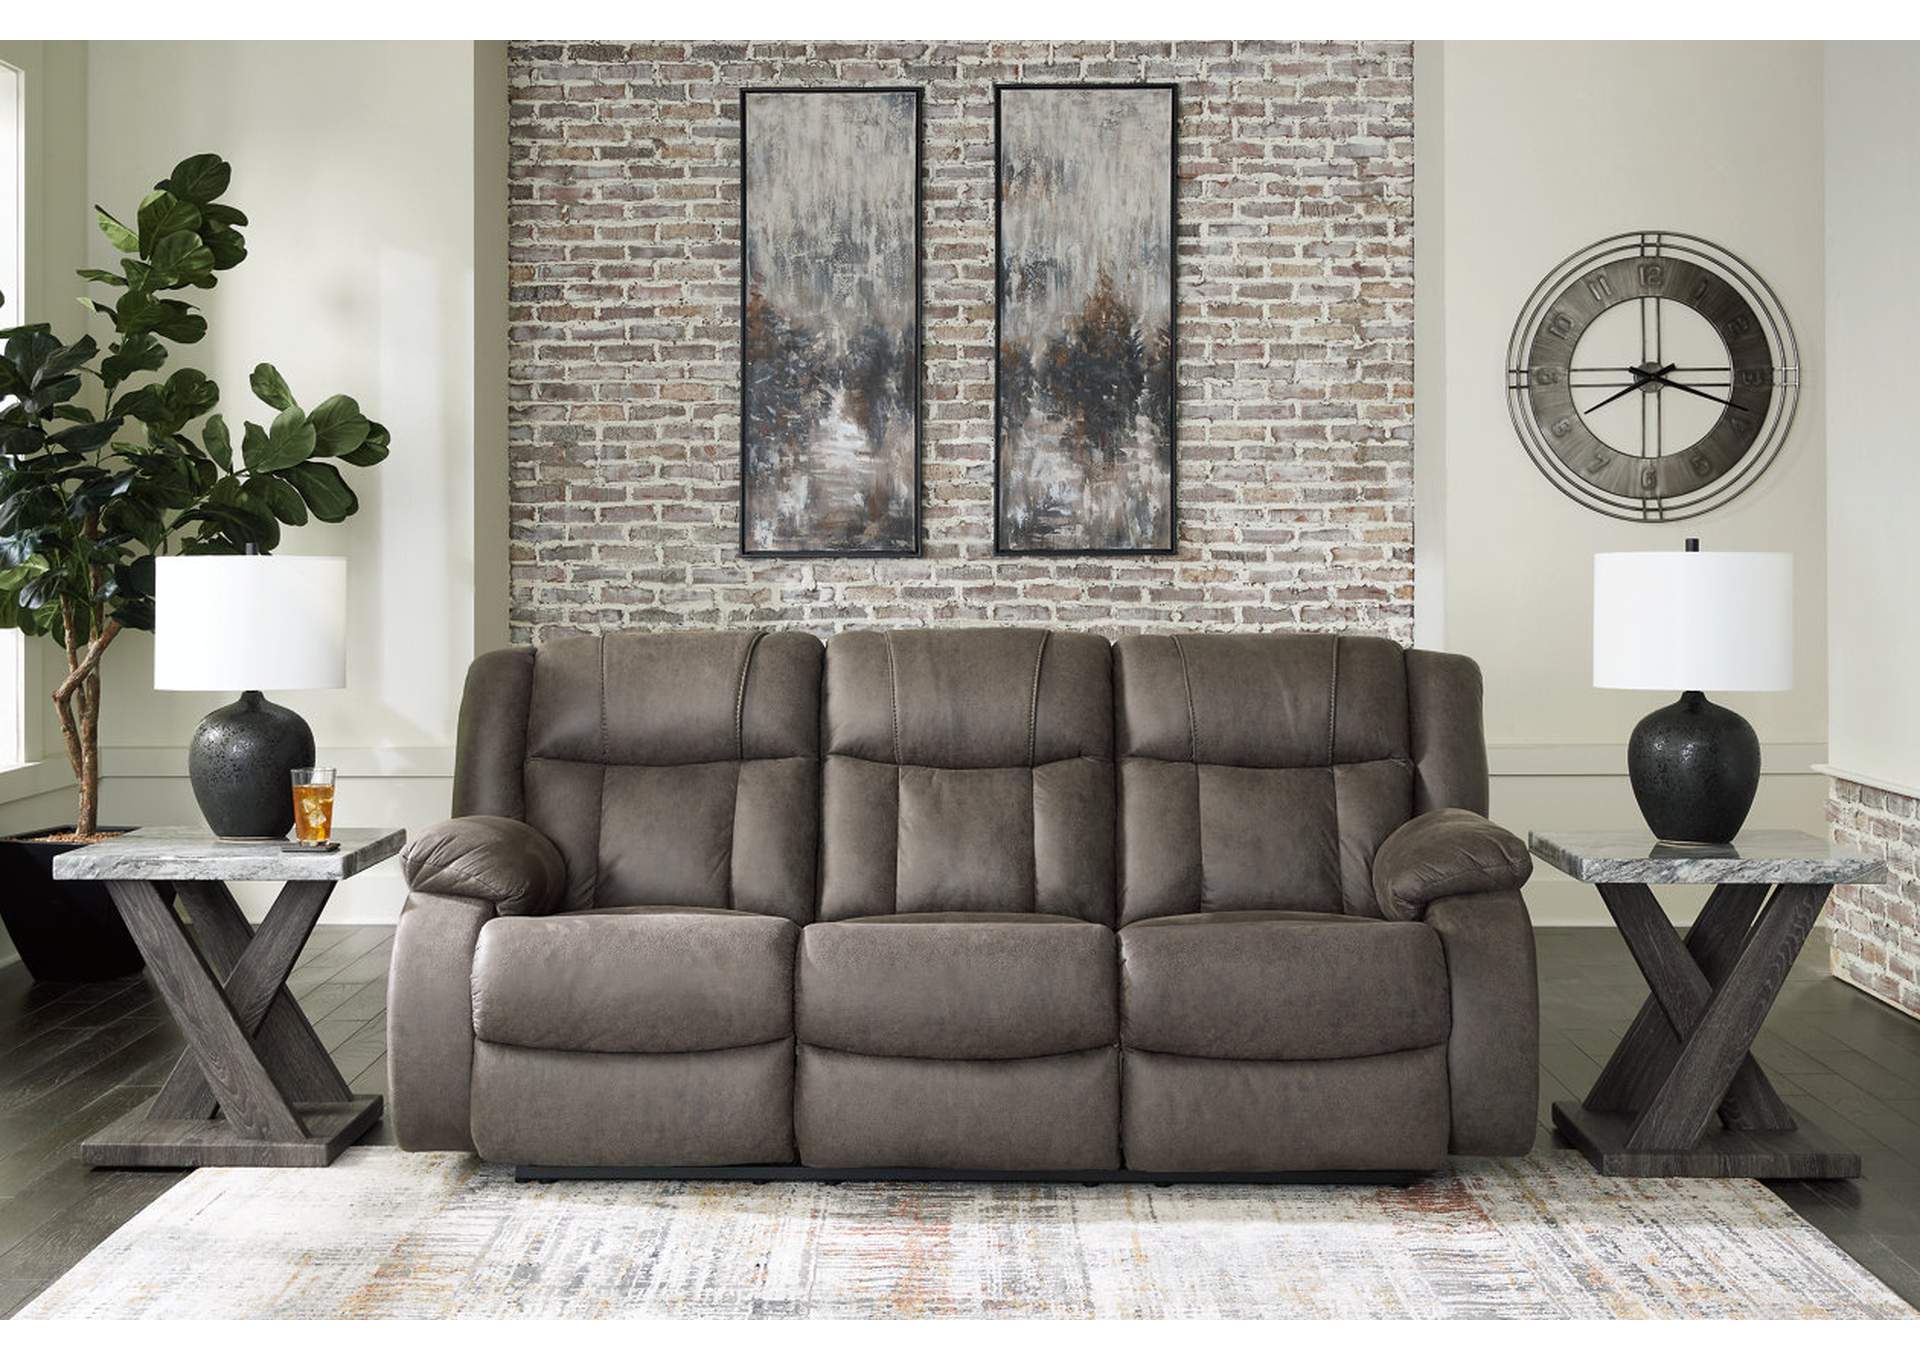 First Base Sofa, Loveseat and Recliner,Signature Design By Ashley